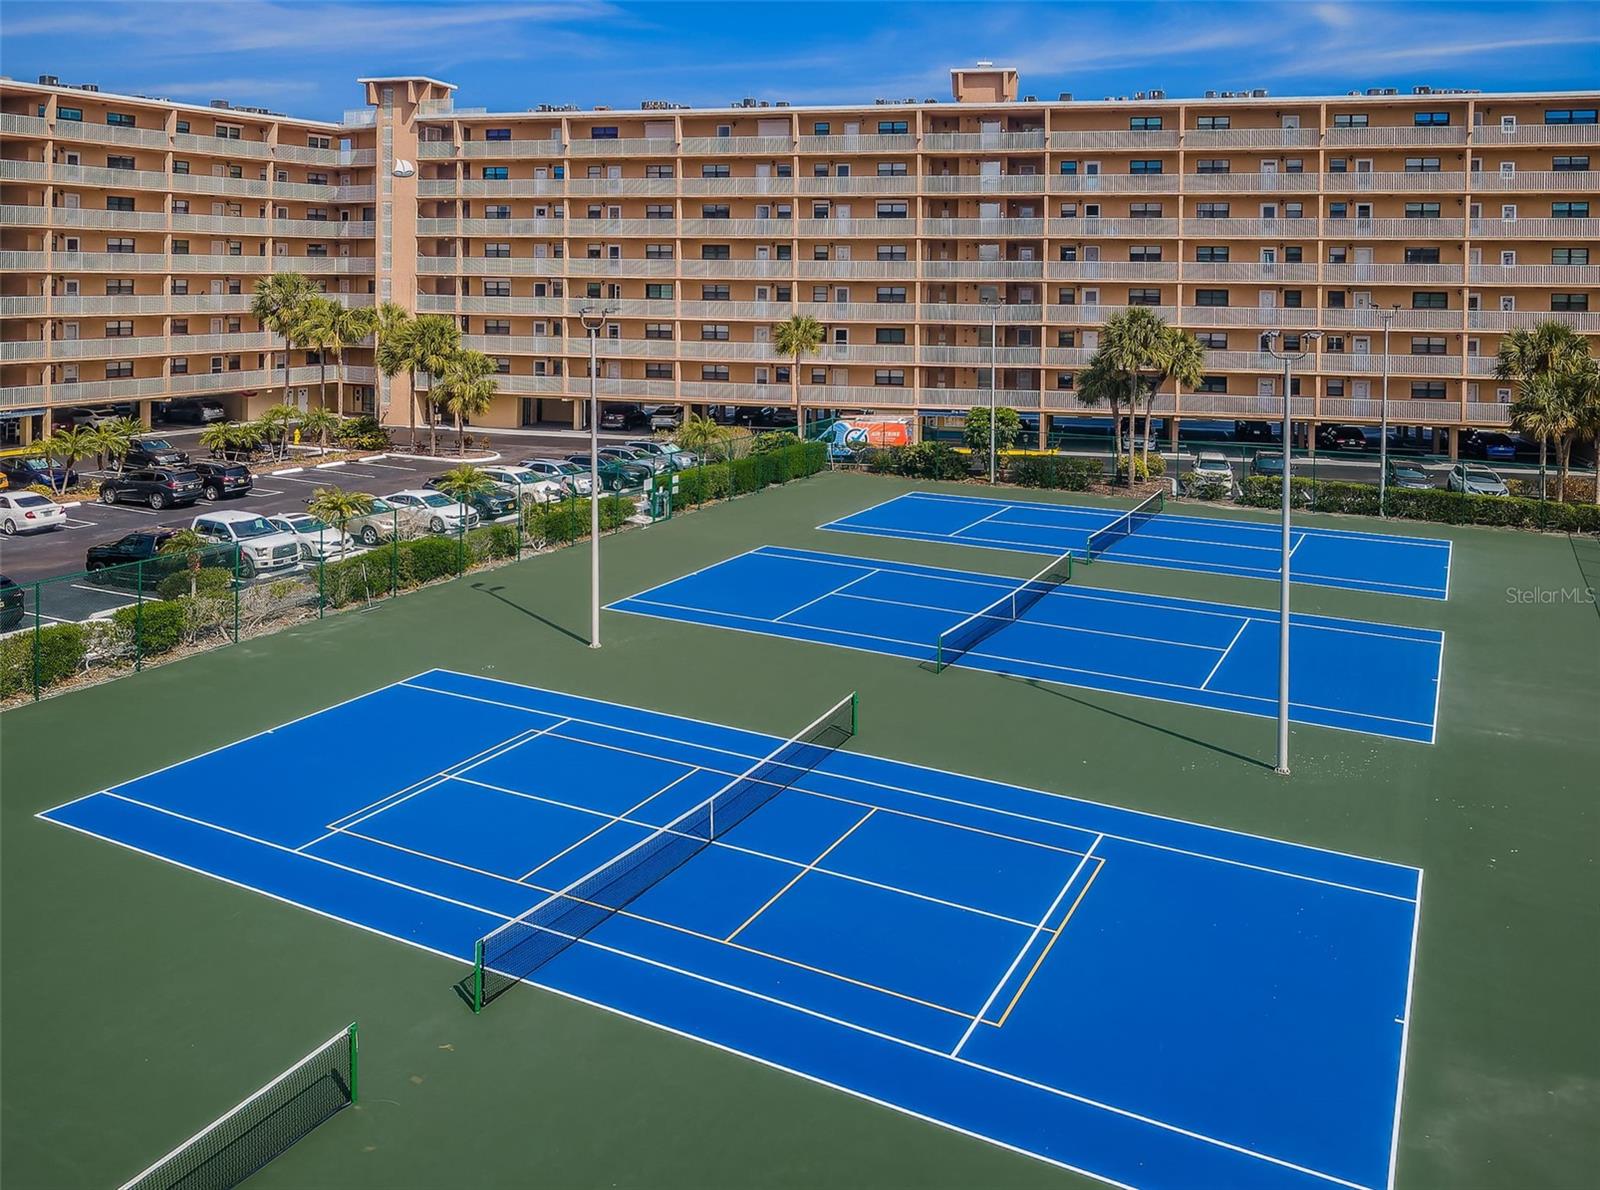 Brand New Tennis and Pickleball Courts